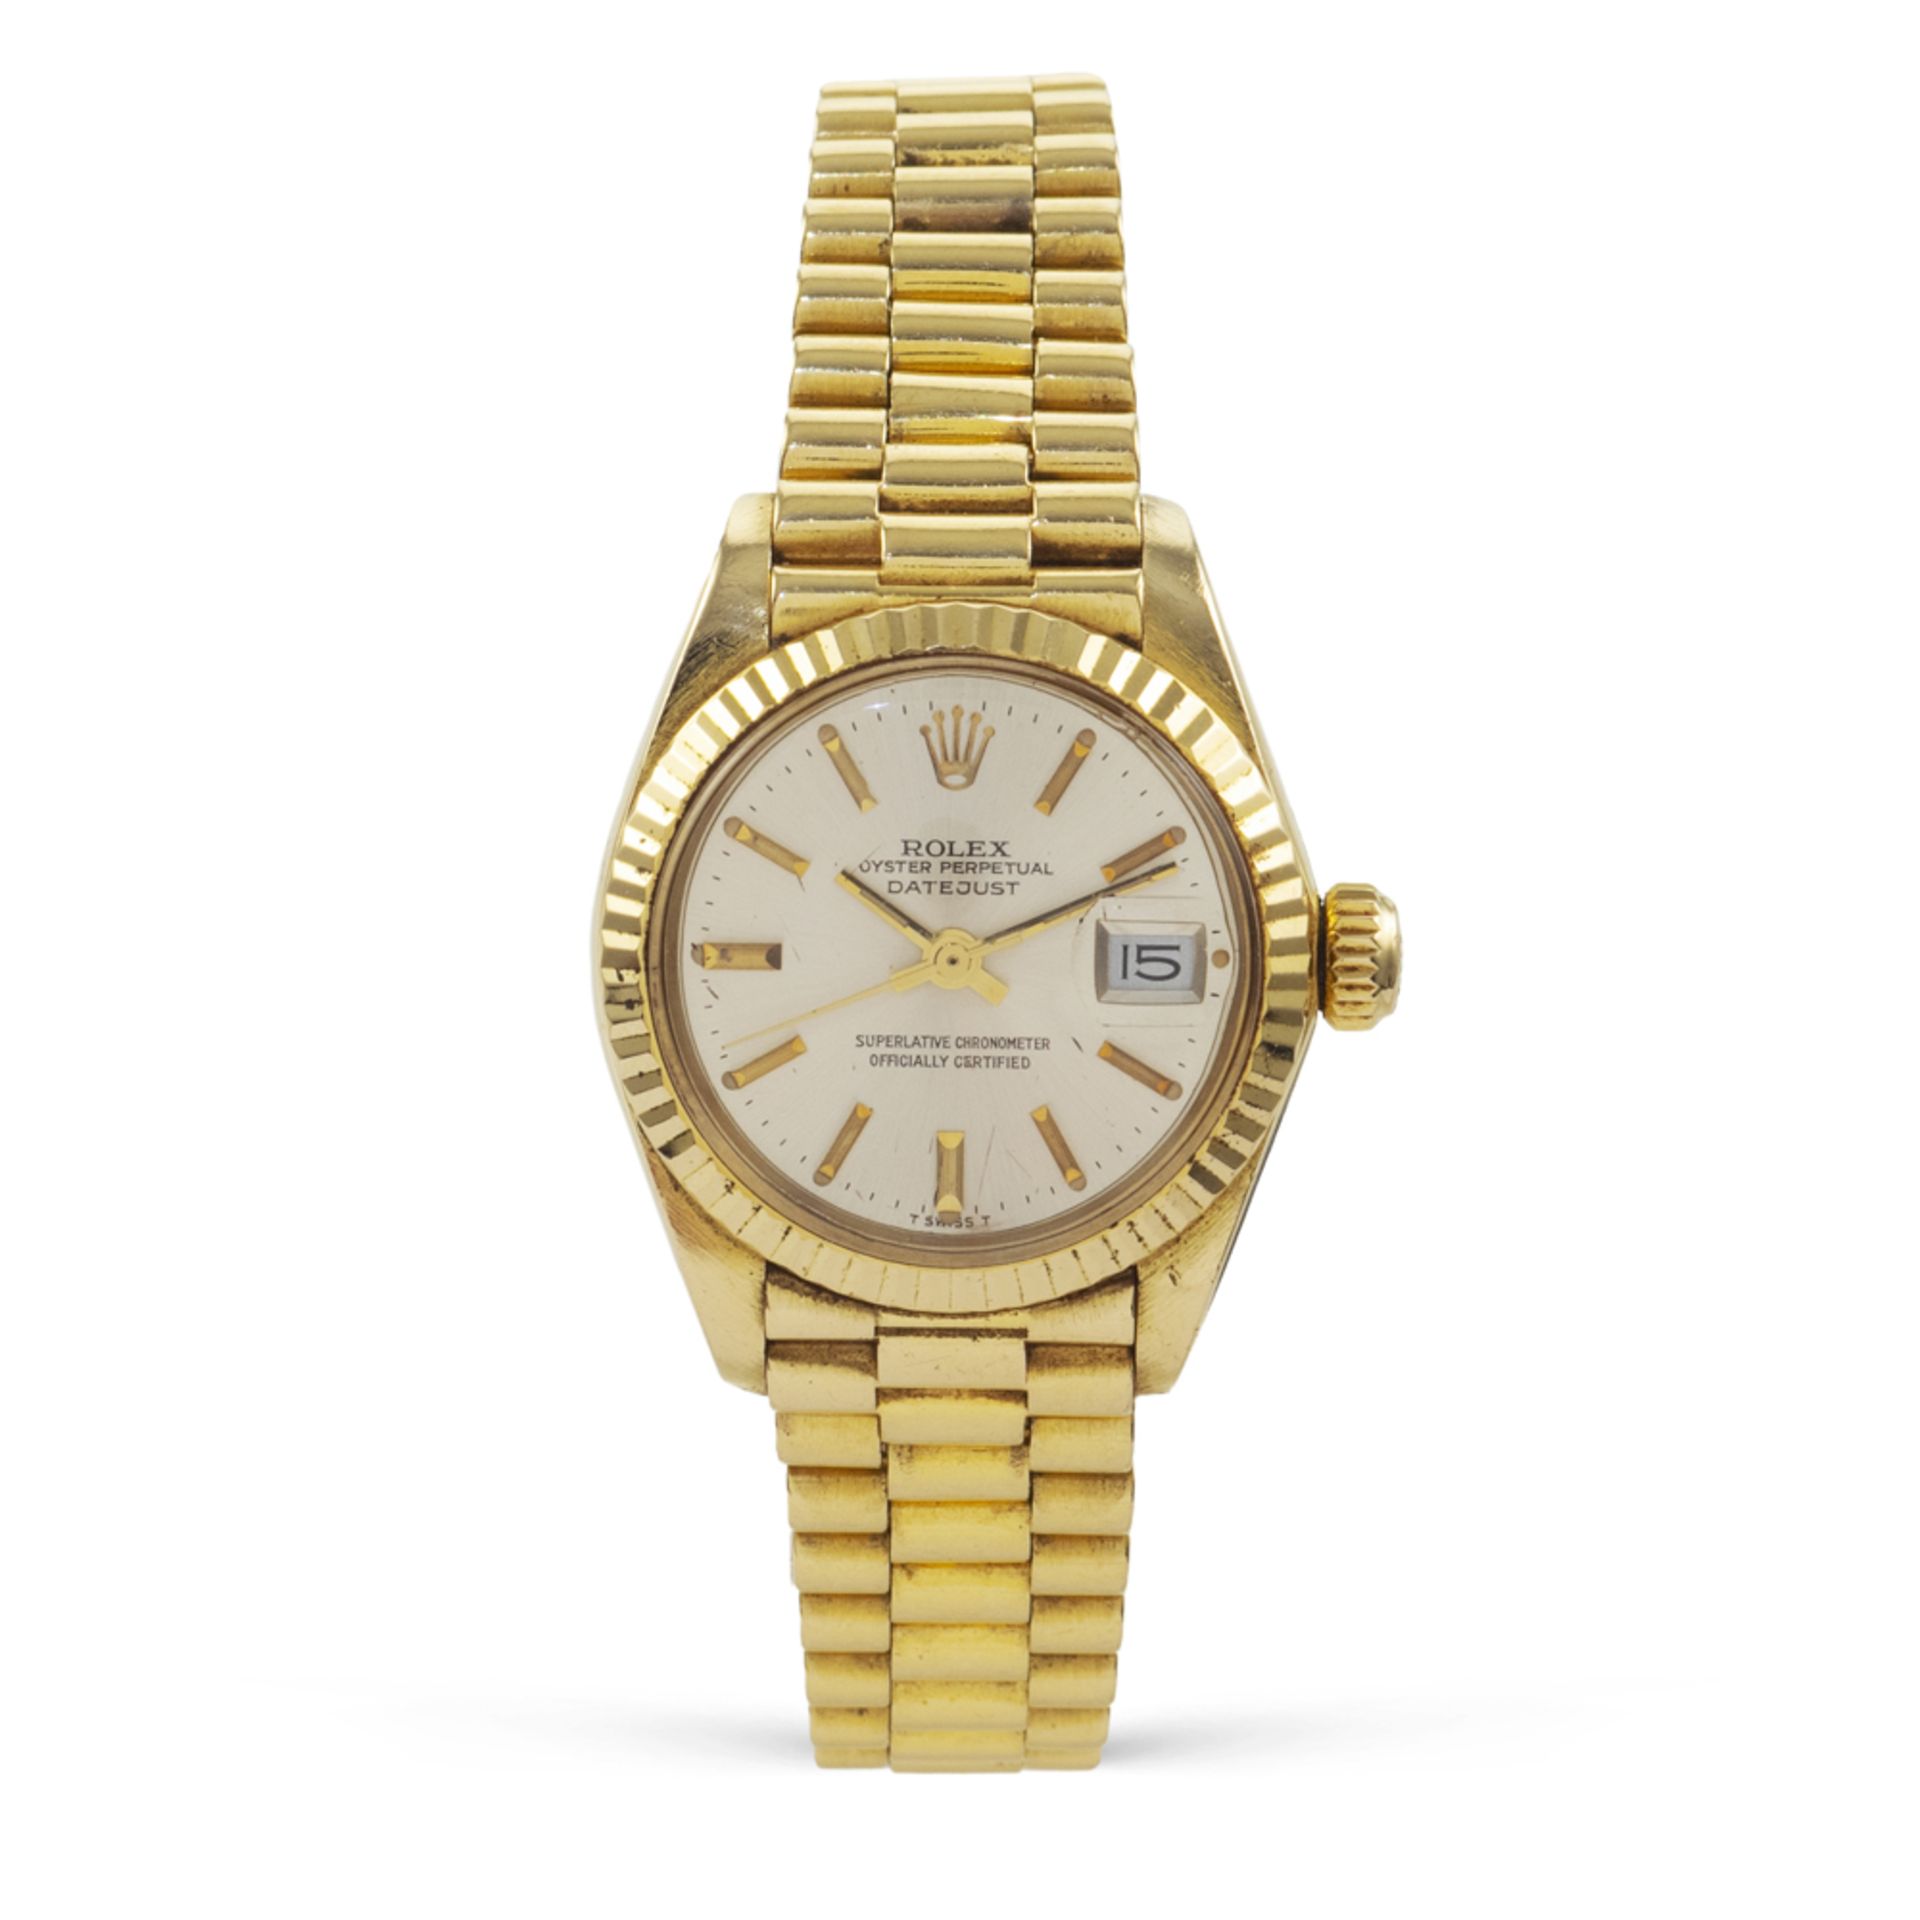 Rolex Oyster Perpetual Datejust, vintage ladies watch